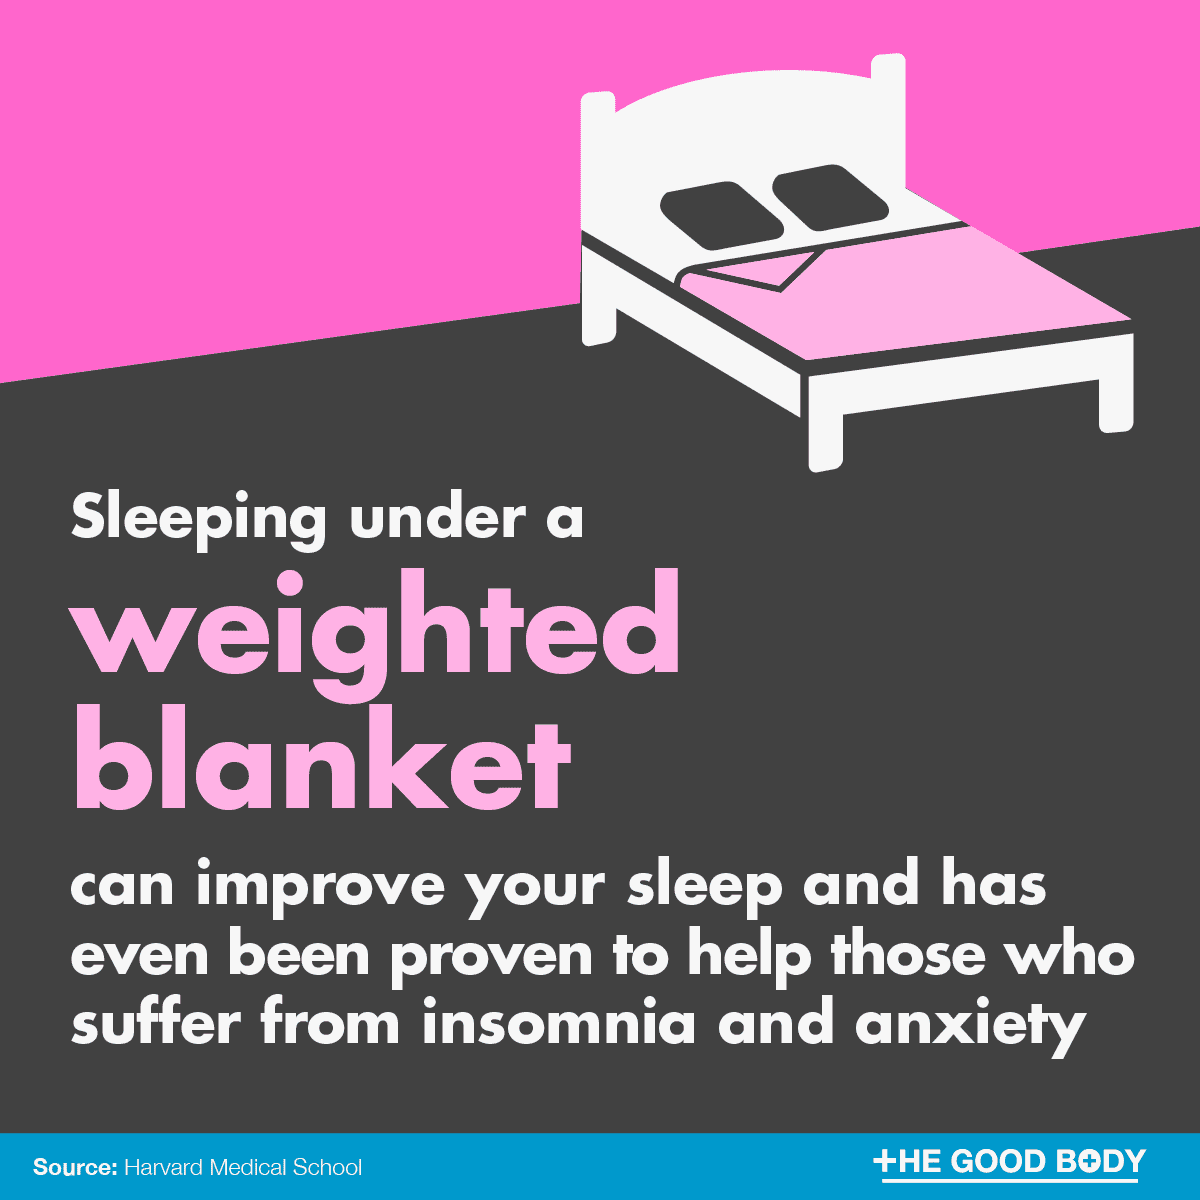 Sleeping under a weighted blanket can improve your sleep and has even been proven to help those who suffer from insomnia and anxiety